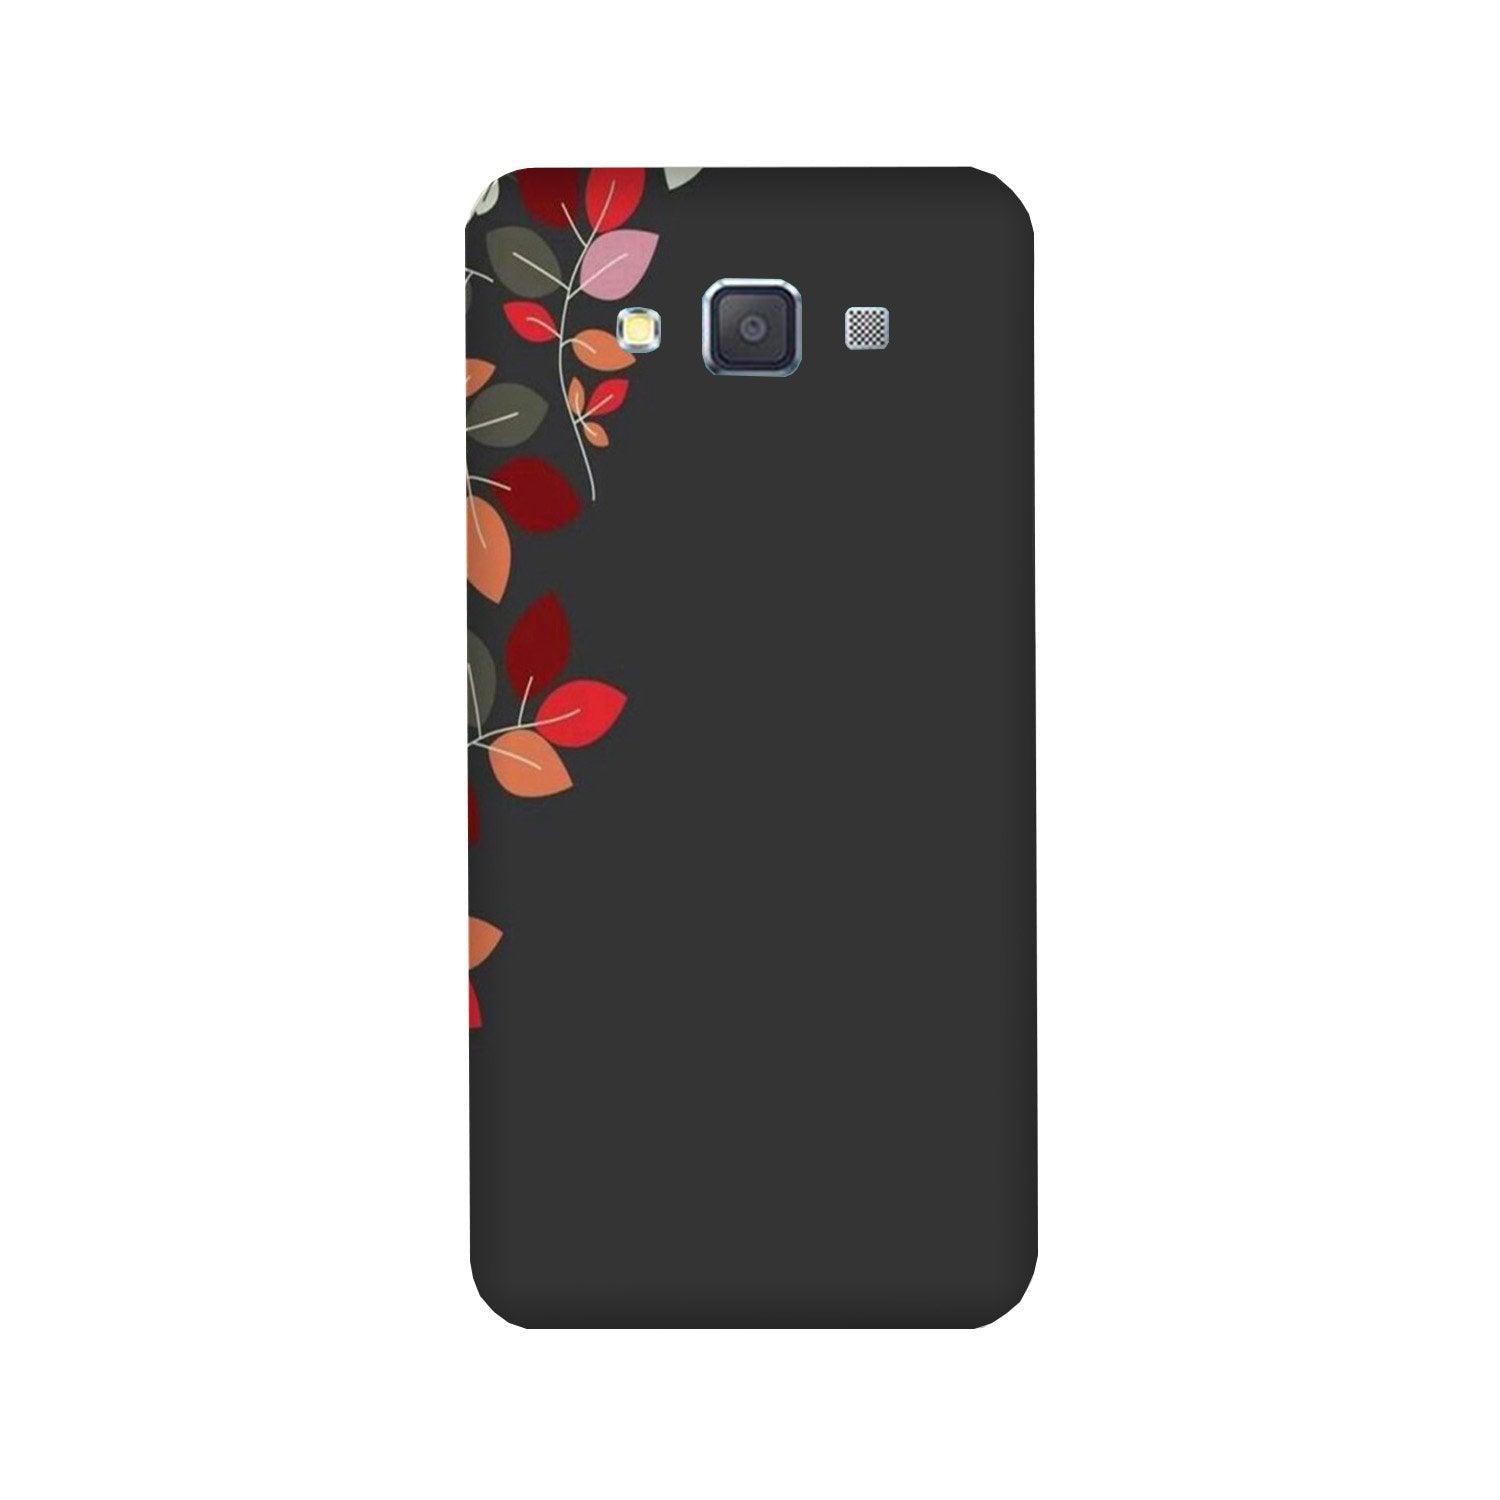 Grey Background Case for Galaxy ON7/ON7 Pro